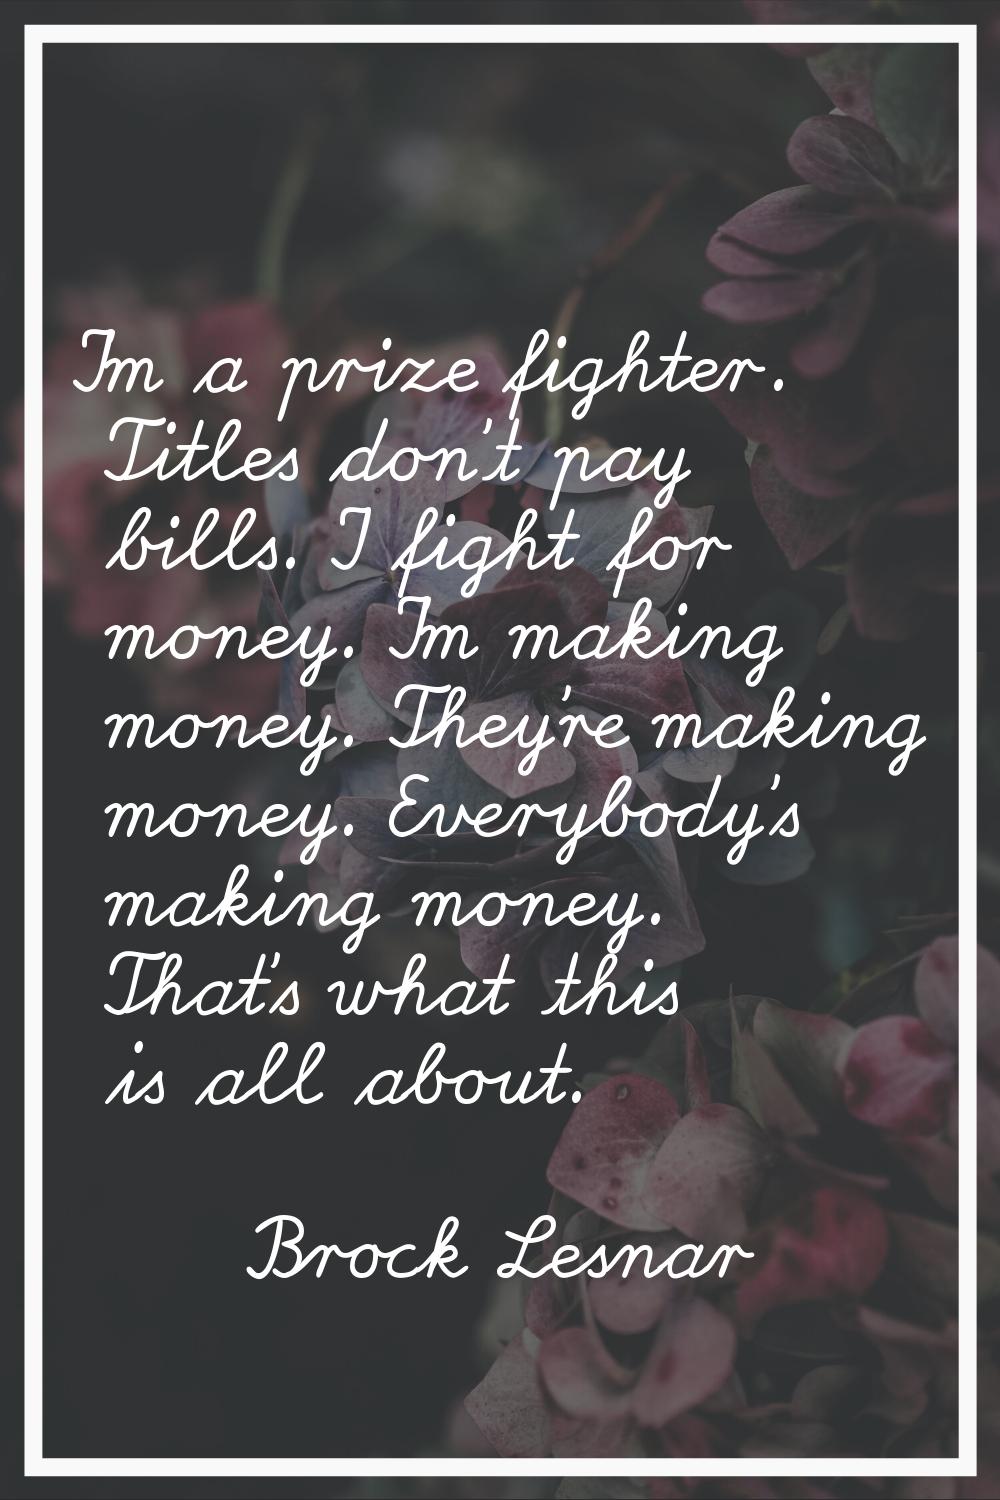 I'm a prize fighter. Titles don't pay bills. I fight for money. I'm making money. They're making mo